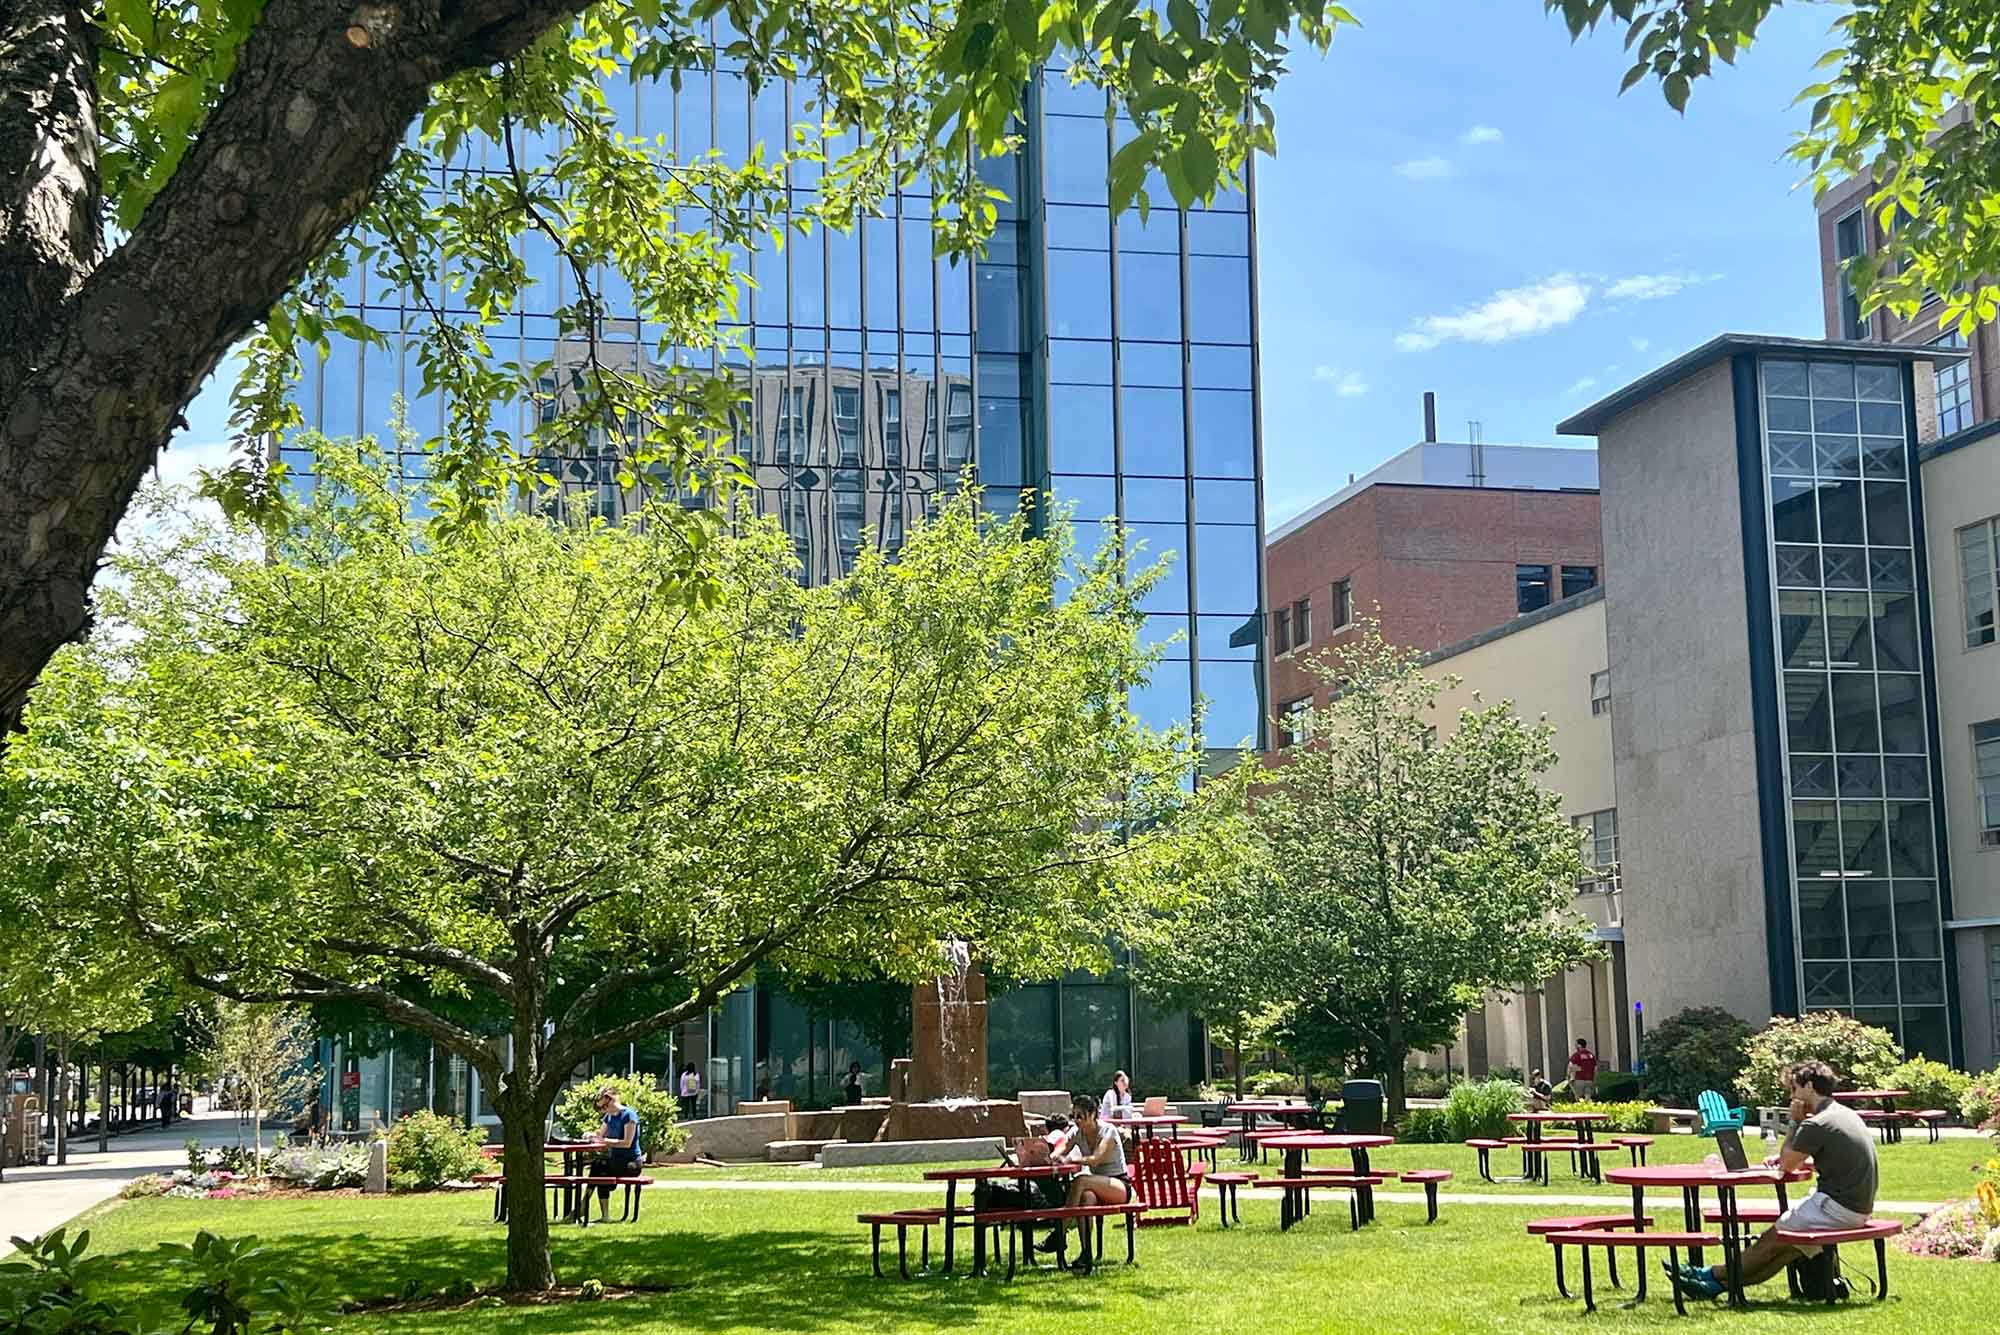 Photo: A picture of a lawn on a college campus with trees and tables where students are working